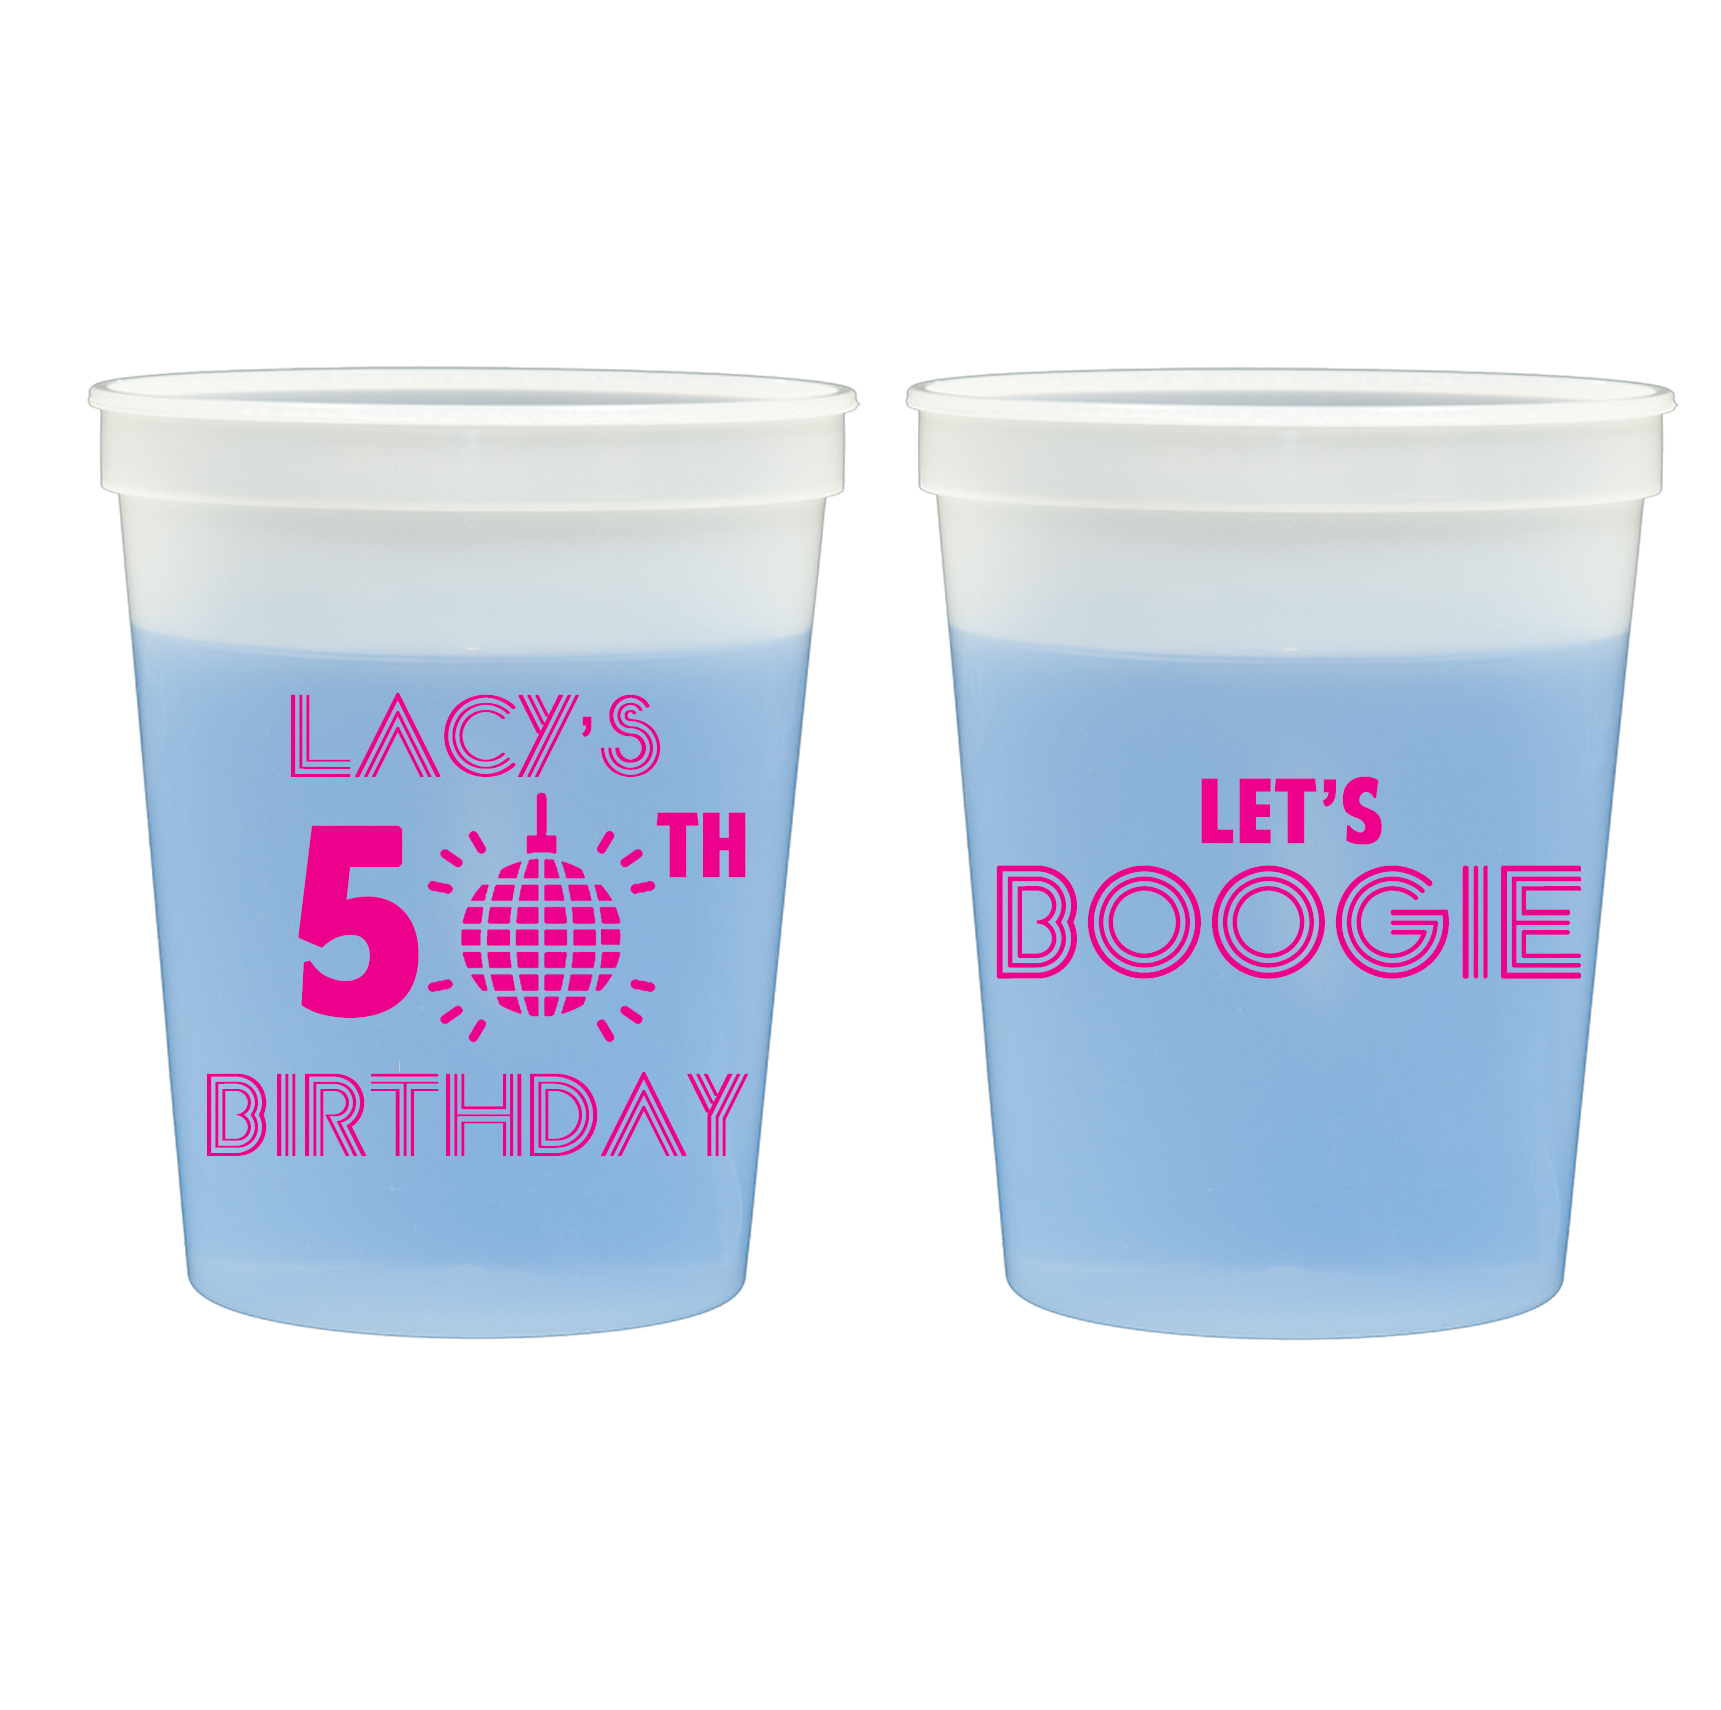 https://www.twofunnygirls.com/wp-content/uploads/2020/07/Personalzied-Birthday-Party-Mood-Plastic-Cups-Disco-Birthday-Party-Decorations-Custoim-Printed-1.jpg